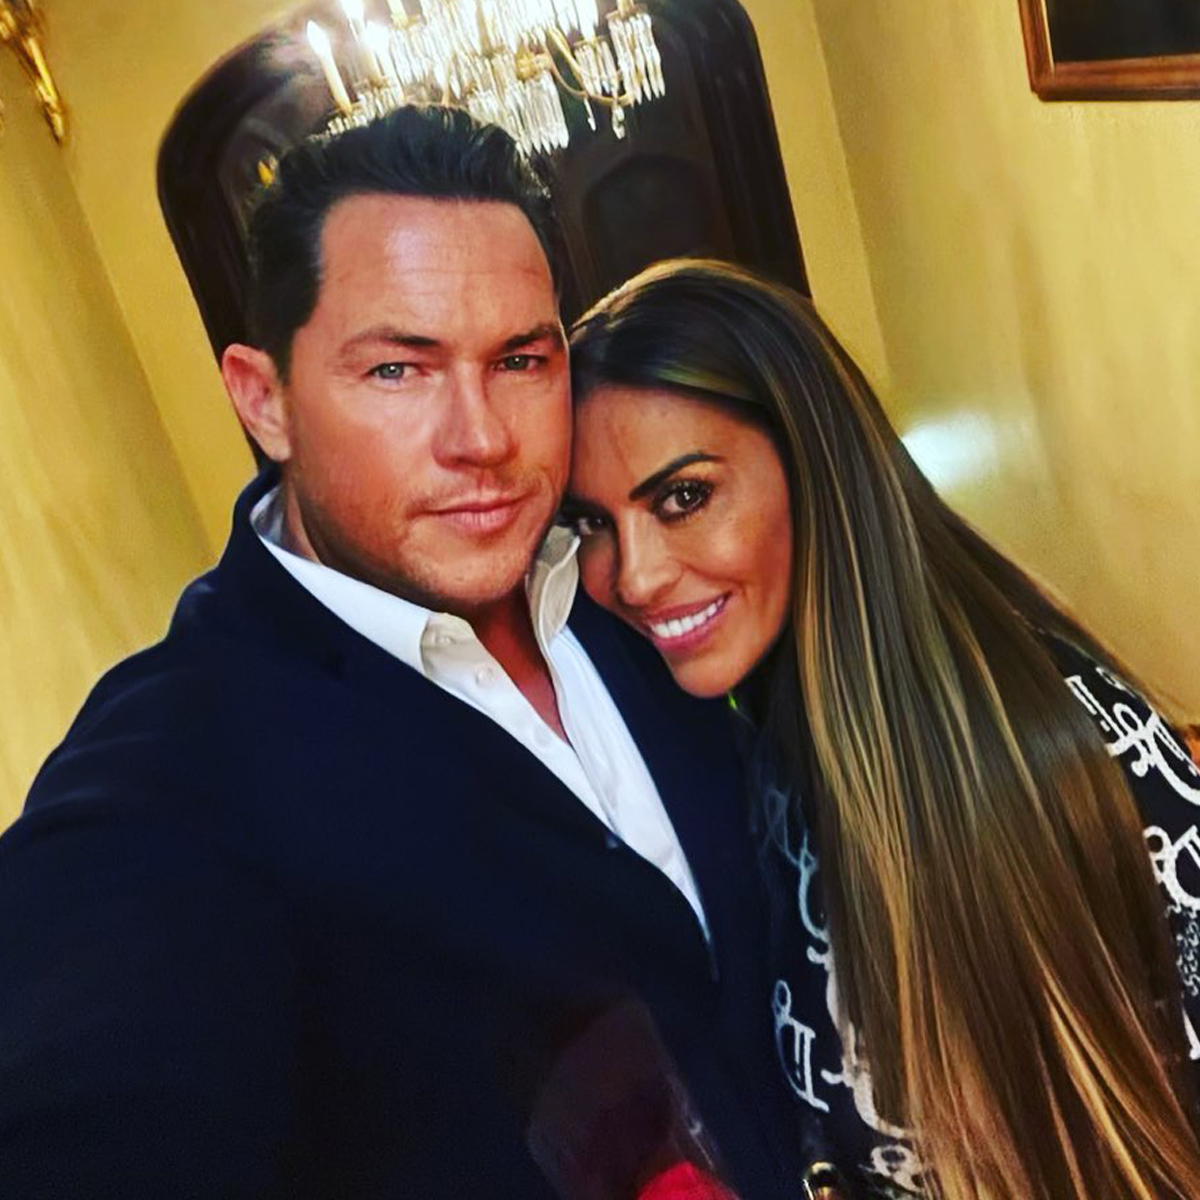 RHONJ: See Dolores Catania’s BF Drop an Engagement Bombshell